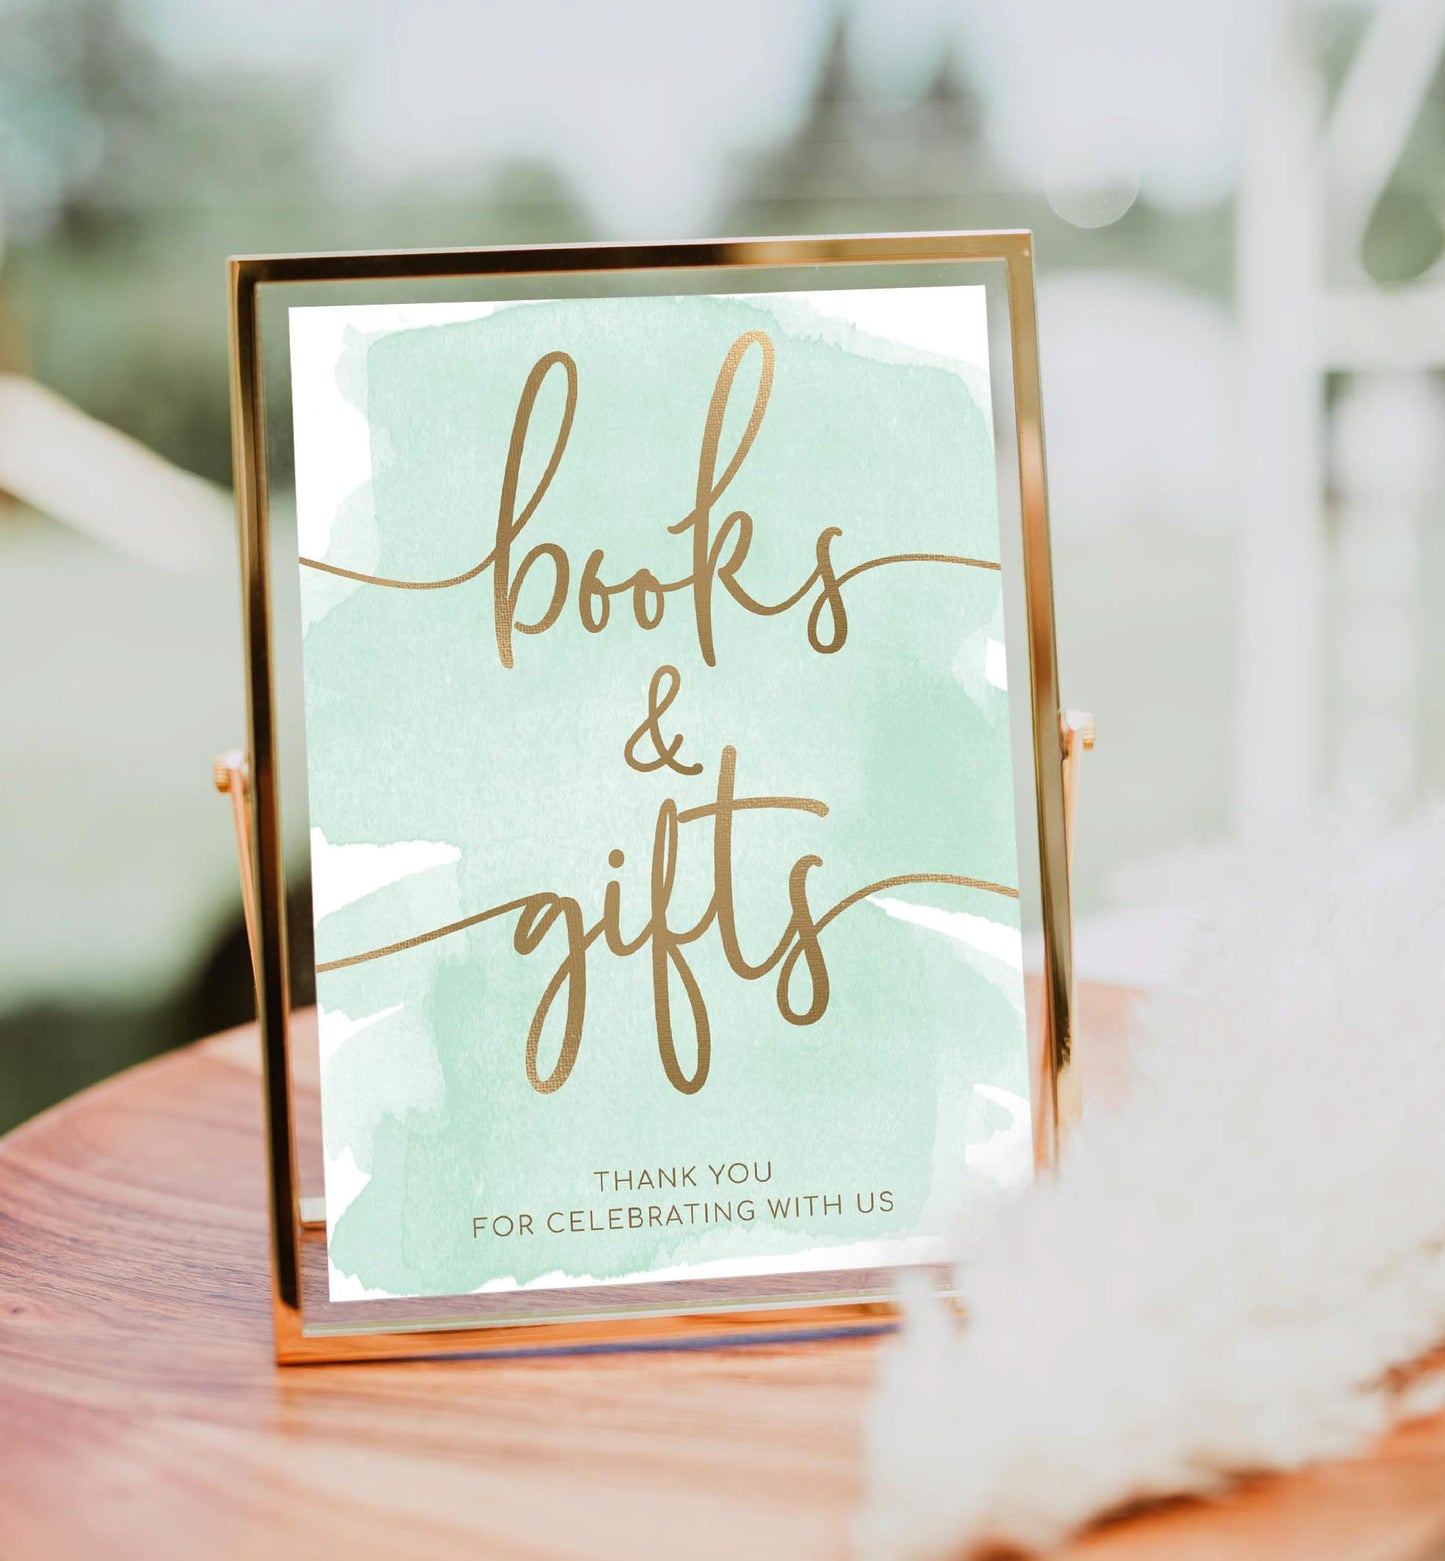 Watercolour Green | Printable Books & Gifts Sign